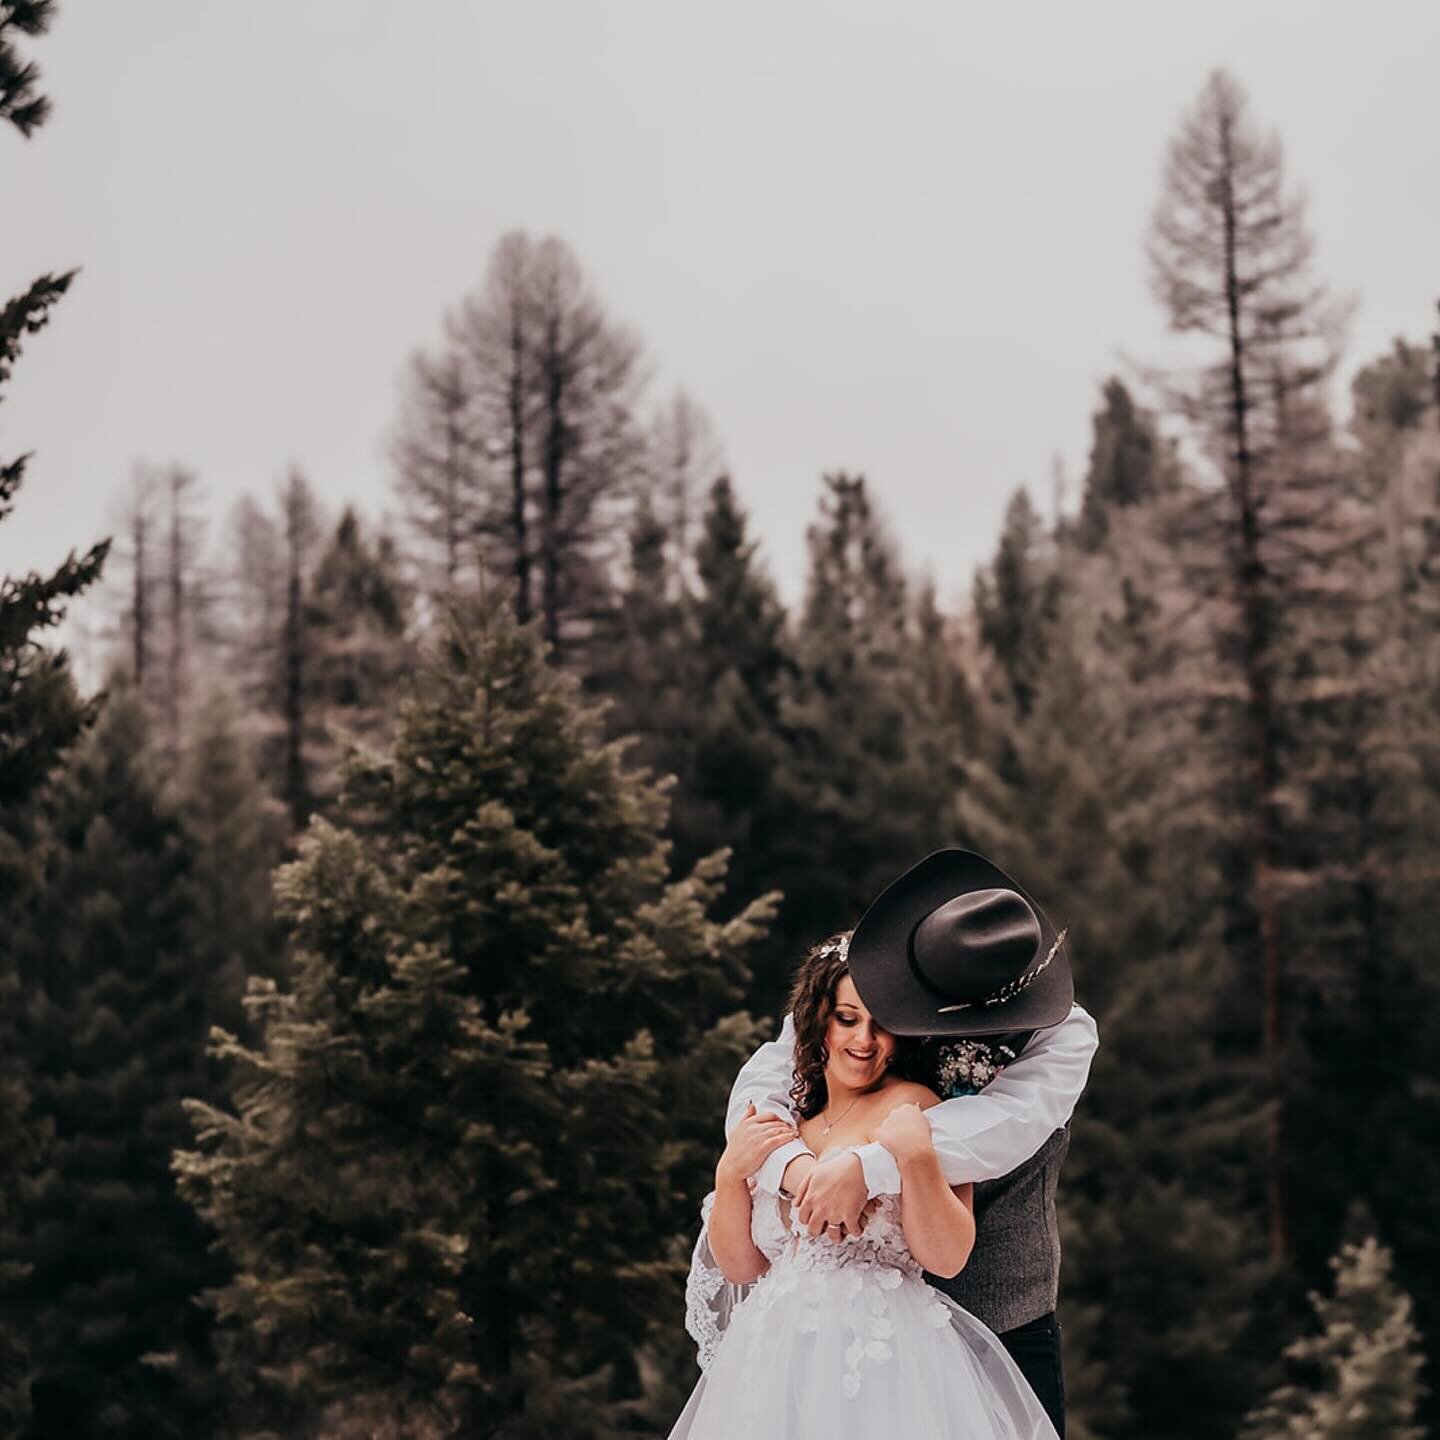 Honestly&hellip; is there a better way to ring in the New Year then to start it together with a New Year Eve&rsquo;s wedding? ❤️ 
❄️ Rowan &amp; Alyssa in the winter wonderland❄️ 
.
#montana #montanawedding #montanaweddingphotographer #montanawedding